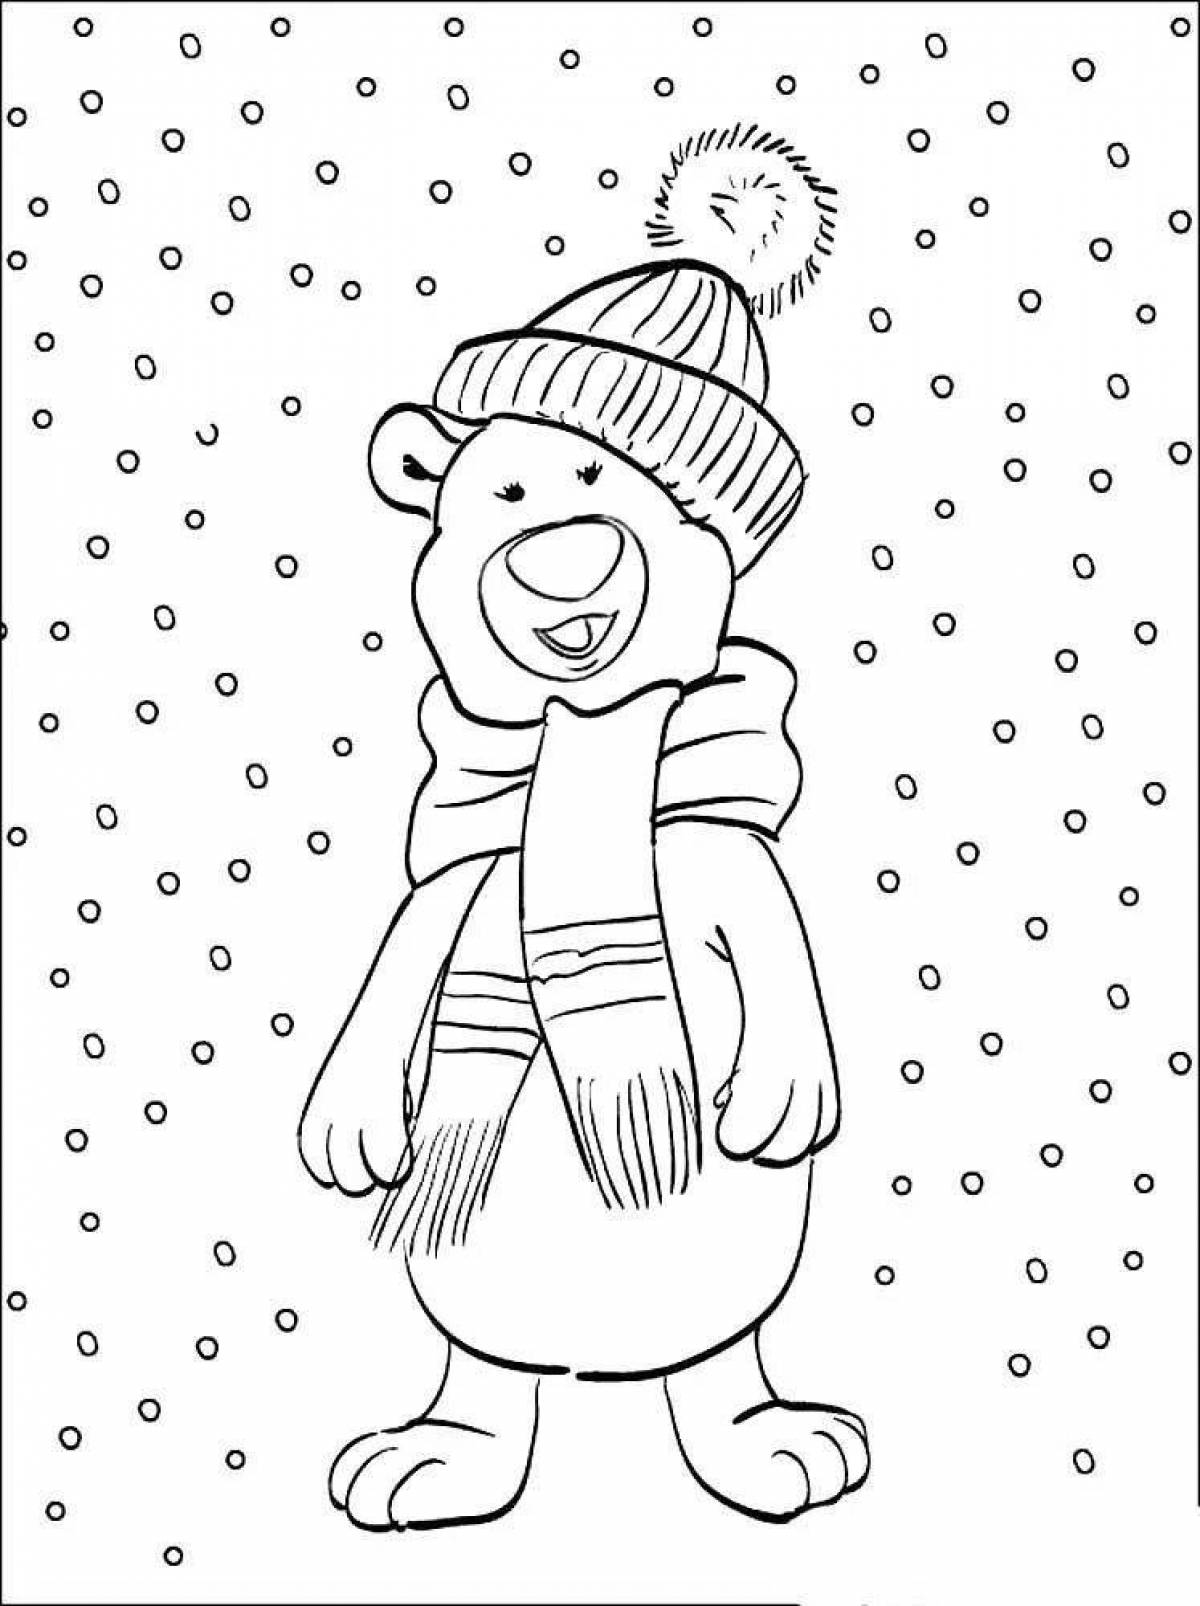 Glowing winter fireplace coloring page